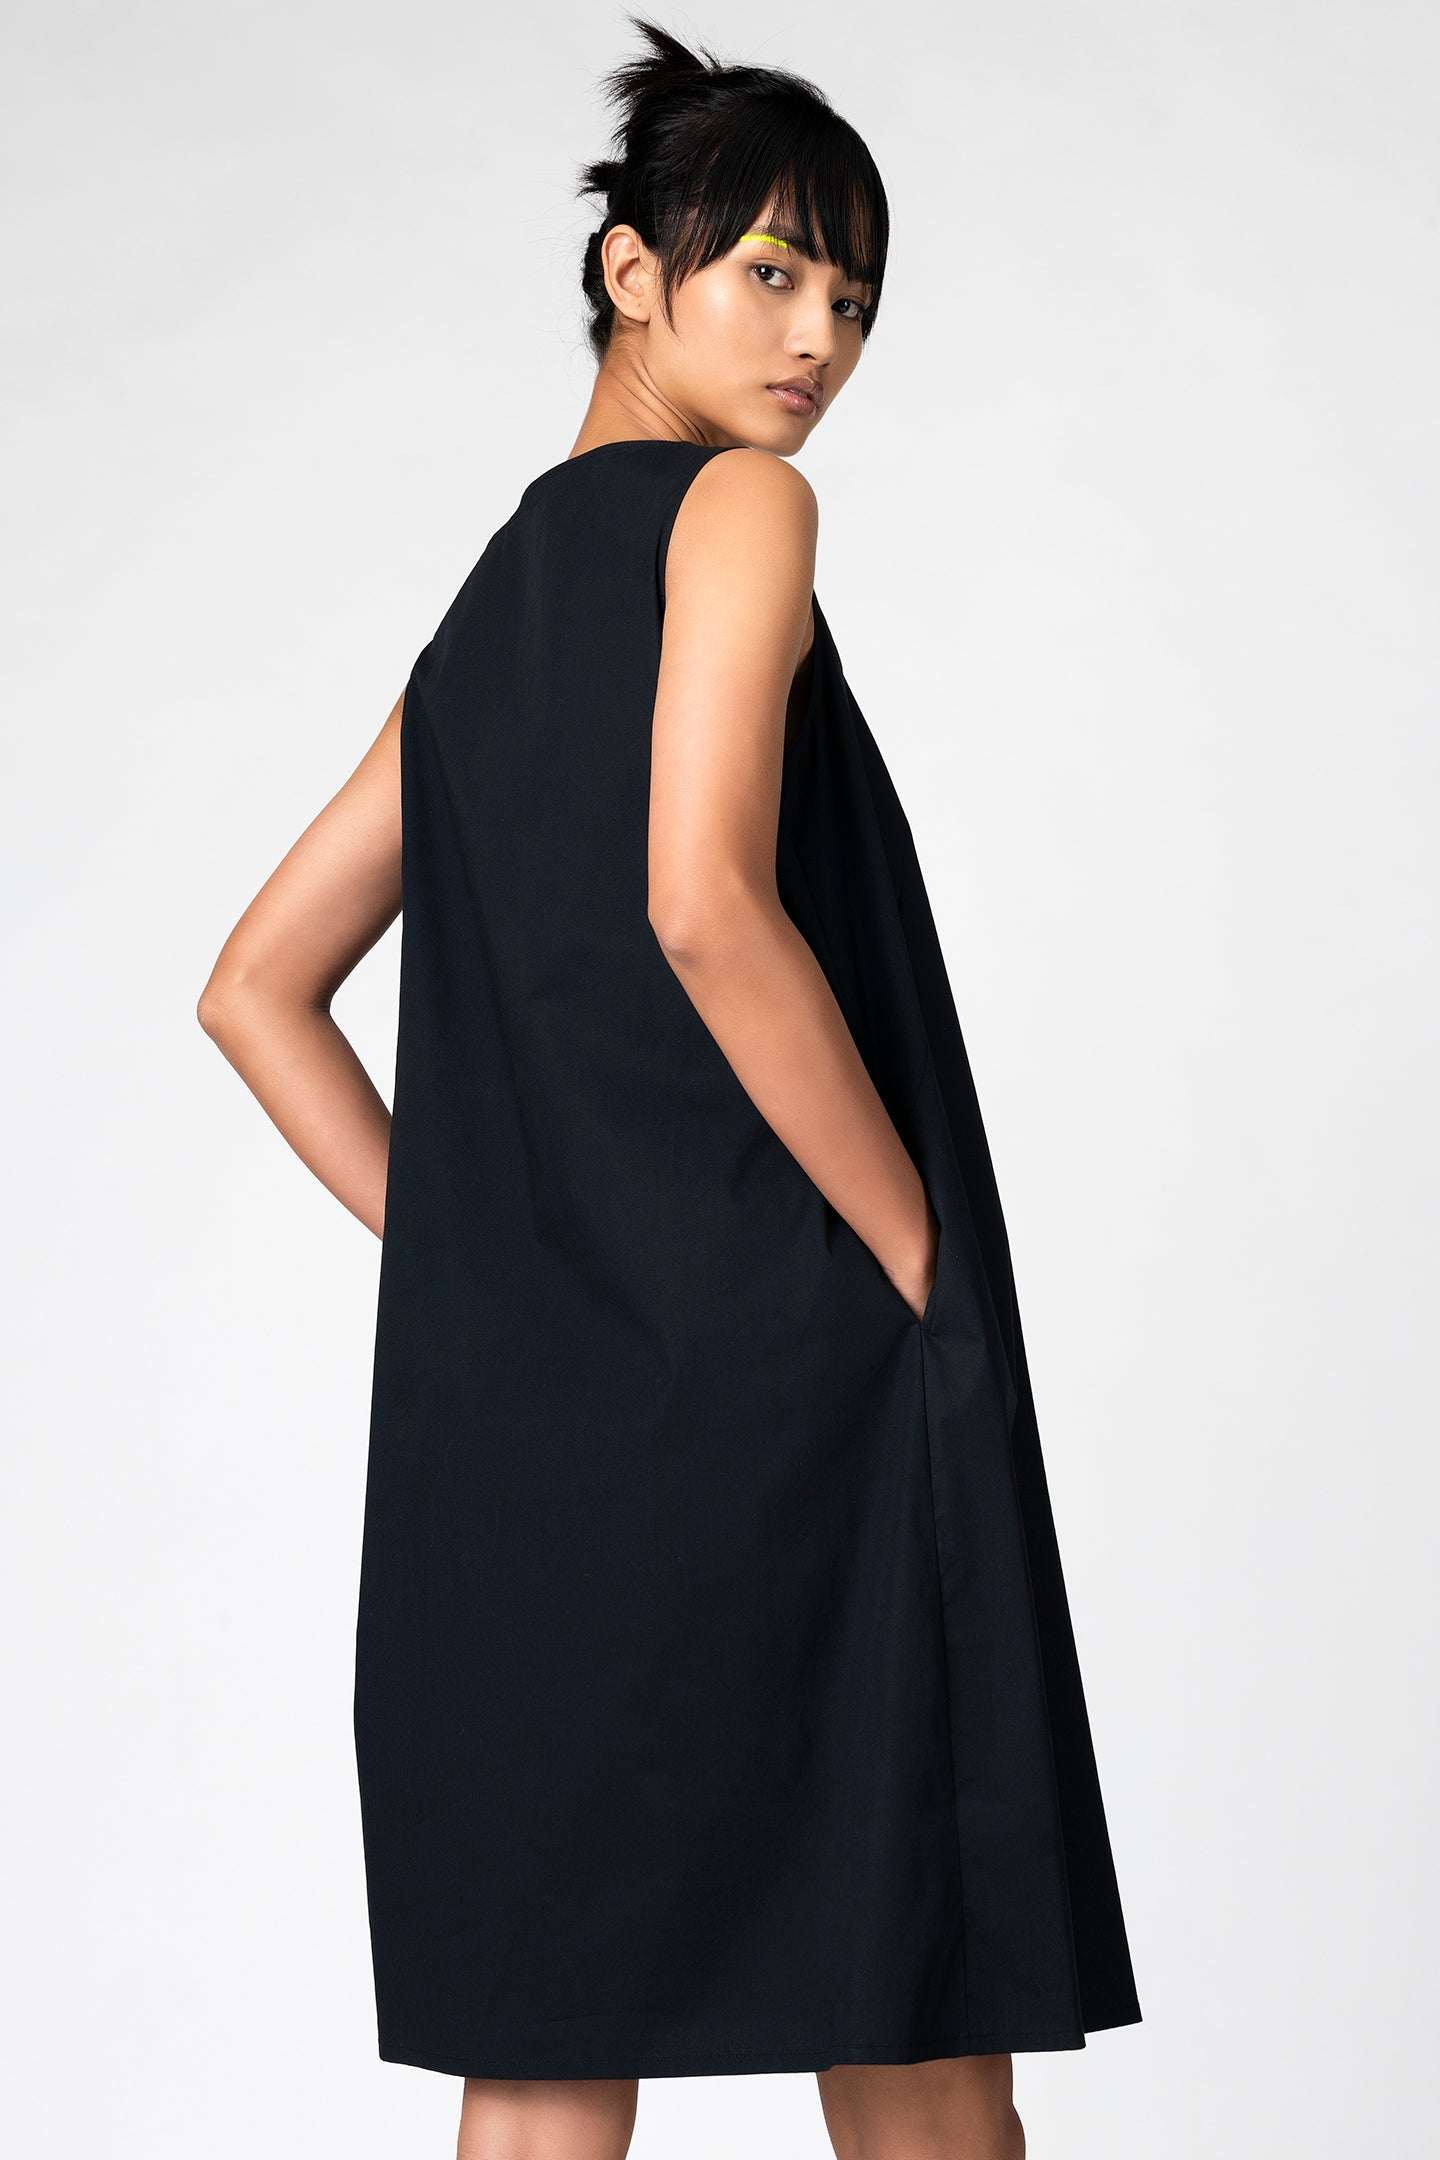 embroidered-draped-dress - Genes online store 2020